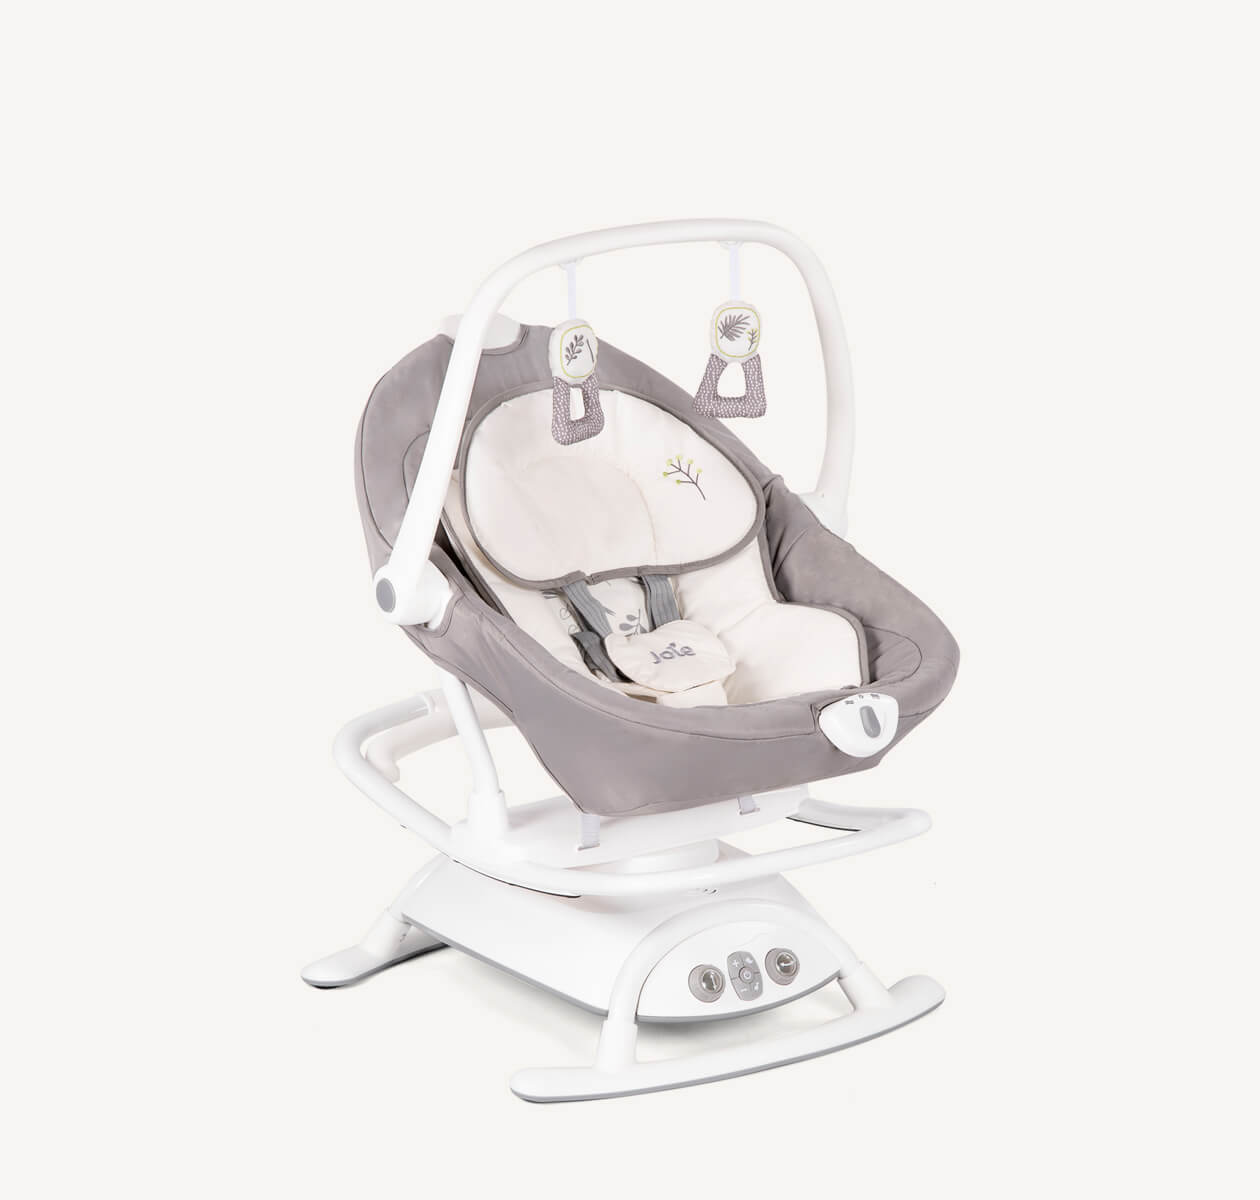 White and gray Joie sansa 2in1 swing at a right angle.